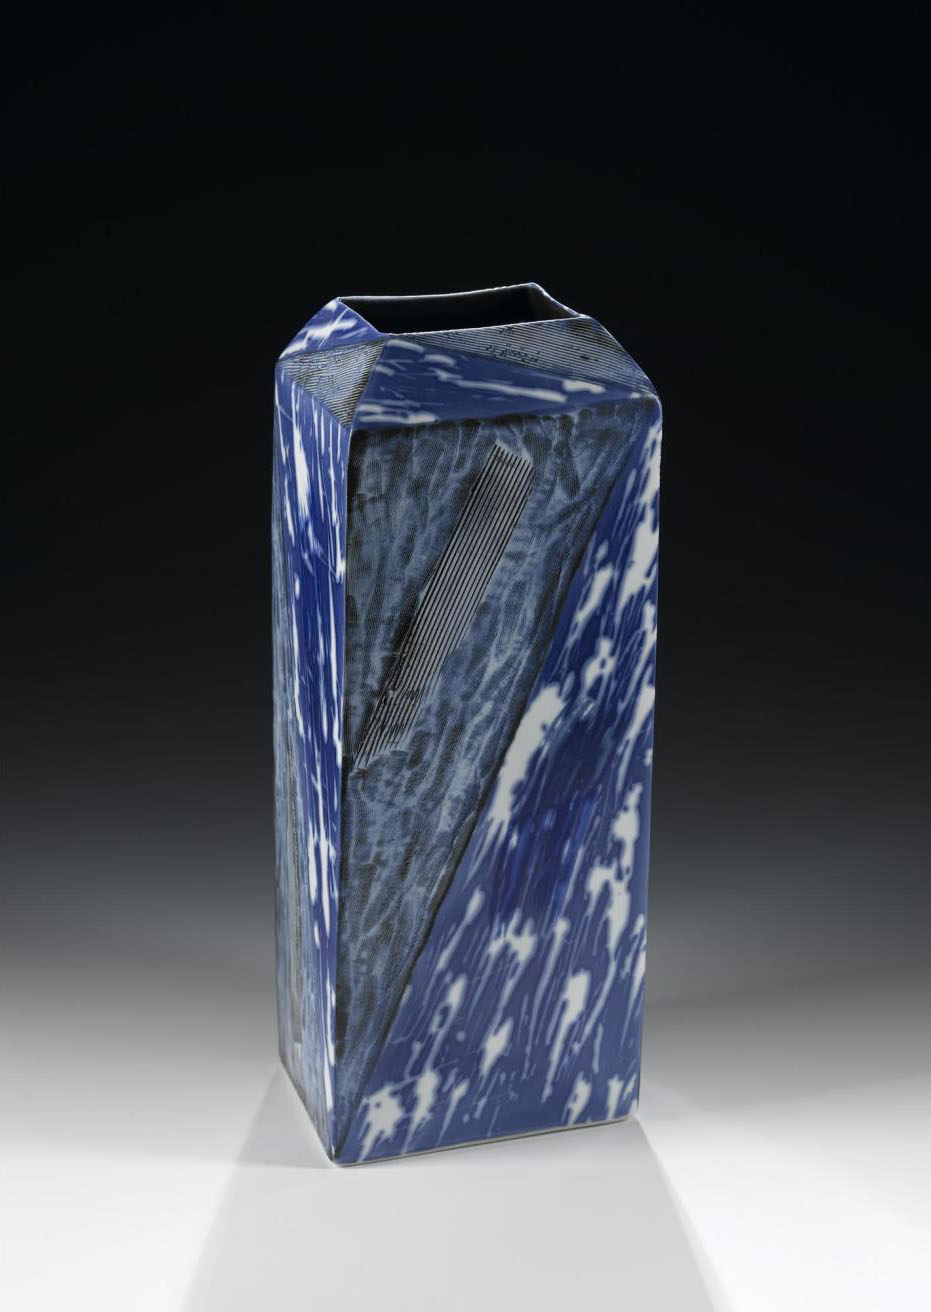 Yin Yang Blue Vase made from porcelain and decorated in blue underglaze. Japan, Kyoto, by Kondo Takahiro, 1993 – 1994. On display in the Artistic Legacies gallery, National Museum of Scotland.